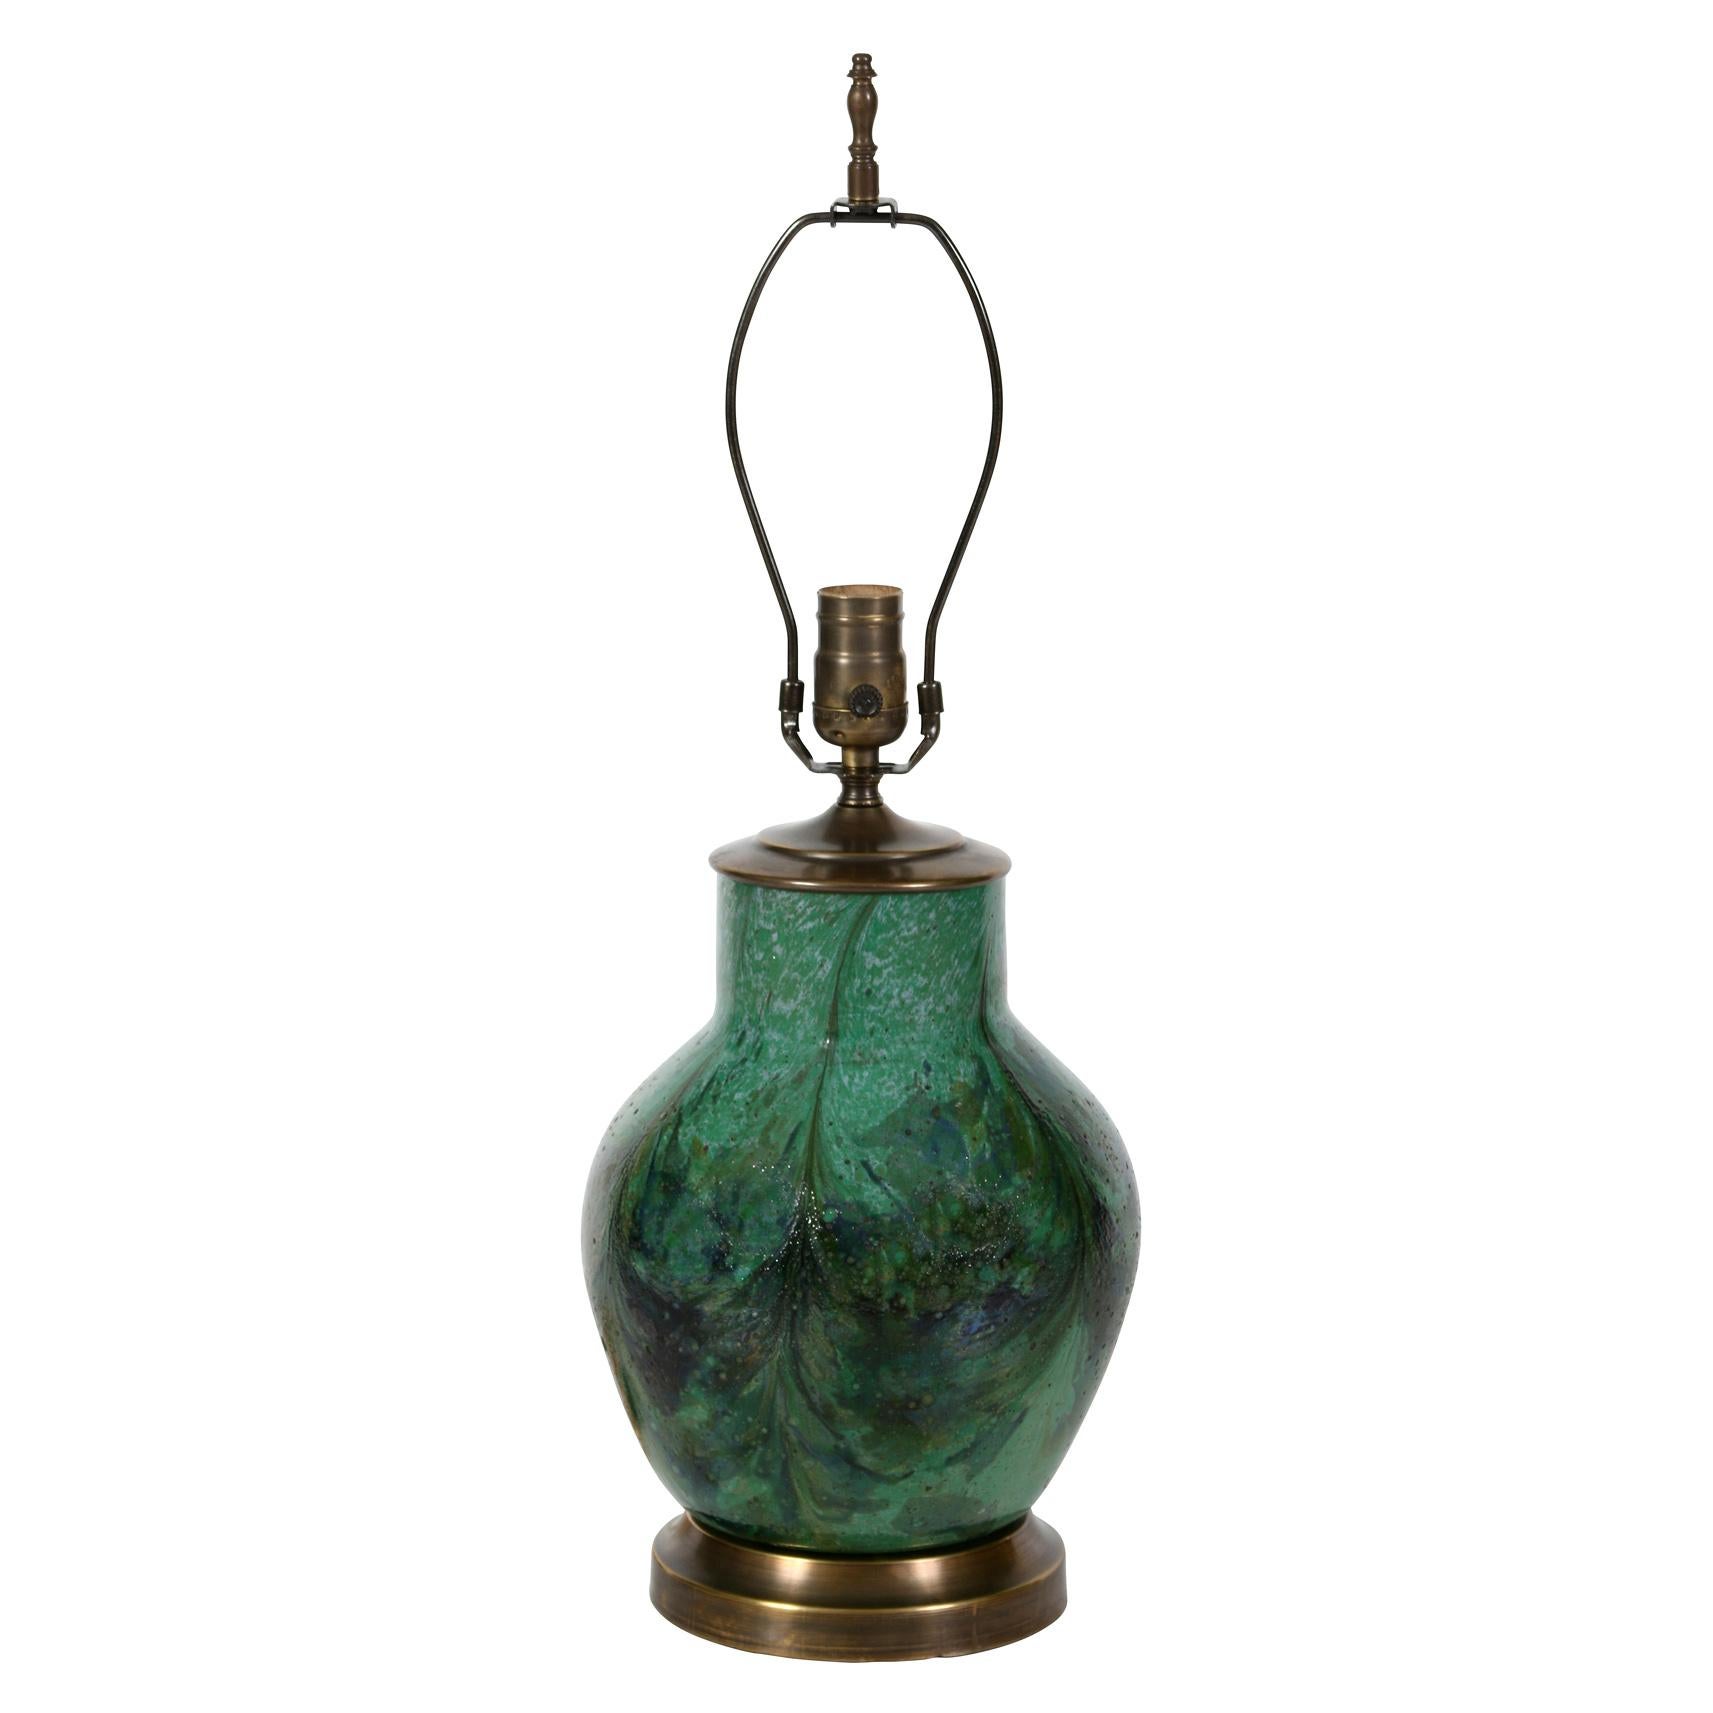 This green ceramic lamp in the Asian style is noteworthy due to its beautiful glaze.  In different hues of greens and blues, the glaze almost has a marbleized effect.  Mounted on a brass base, the lamp is finished with a linen pleated shade.